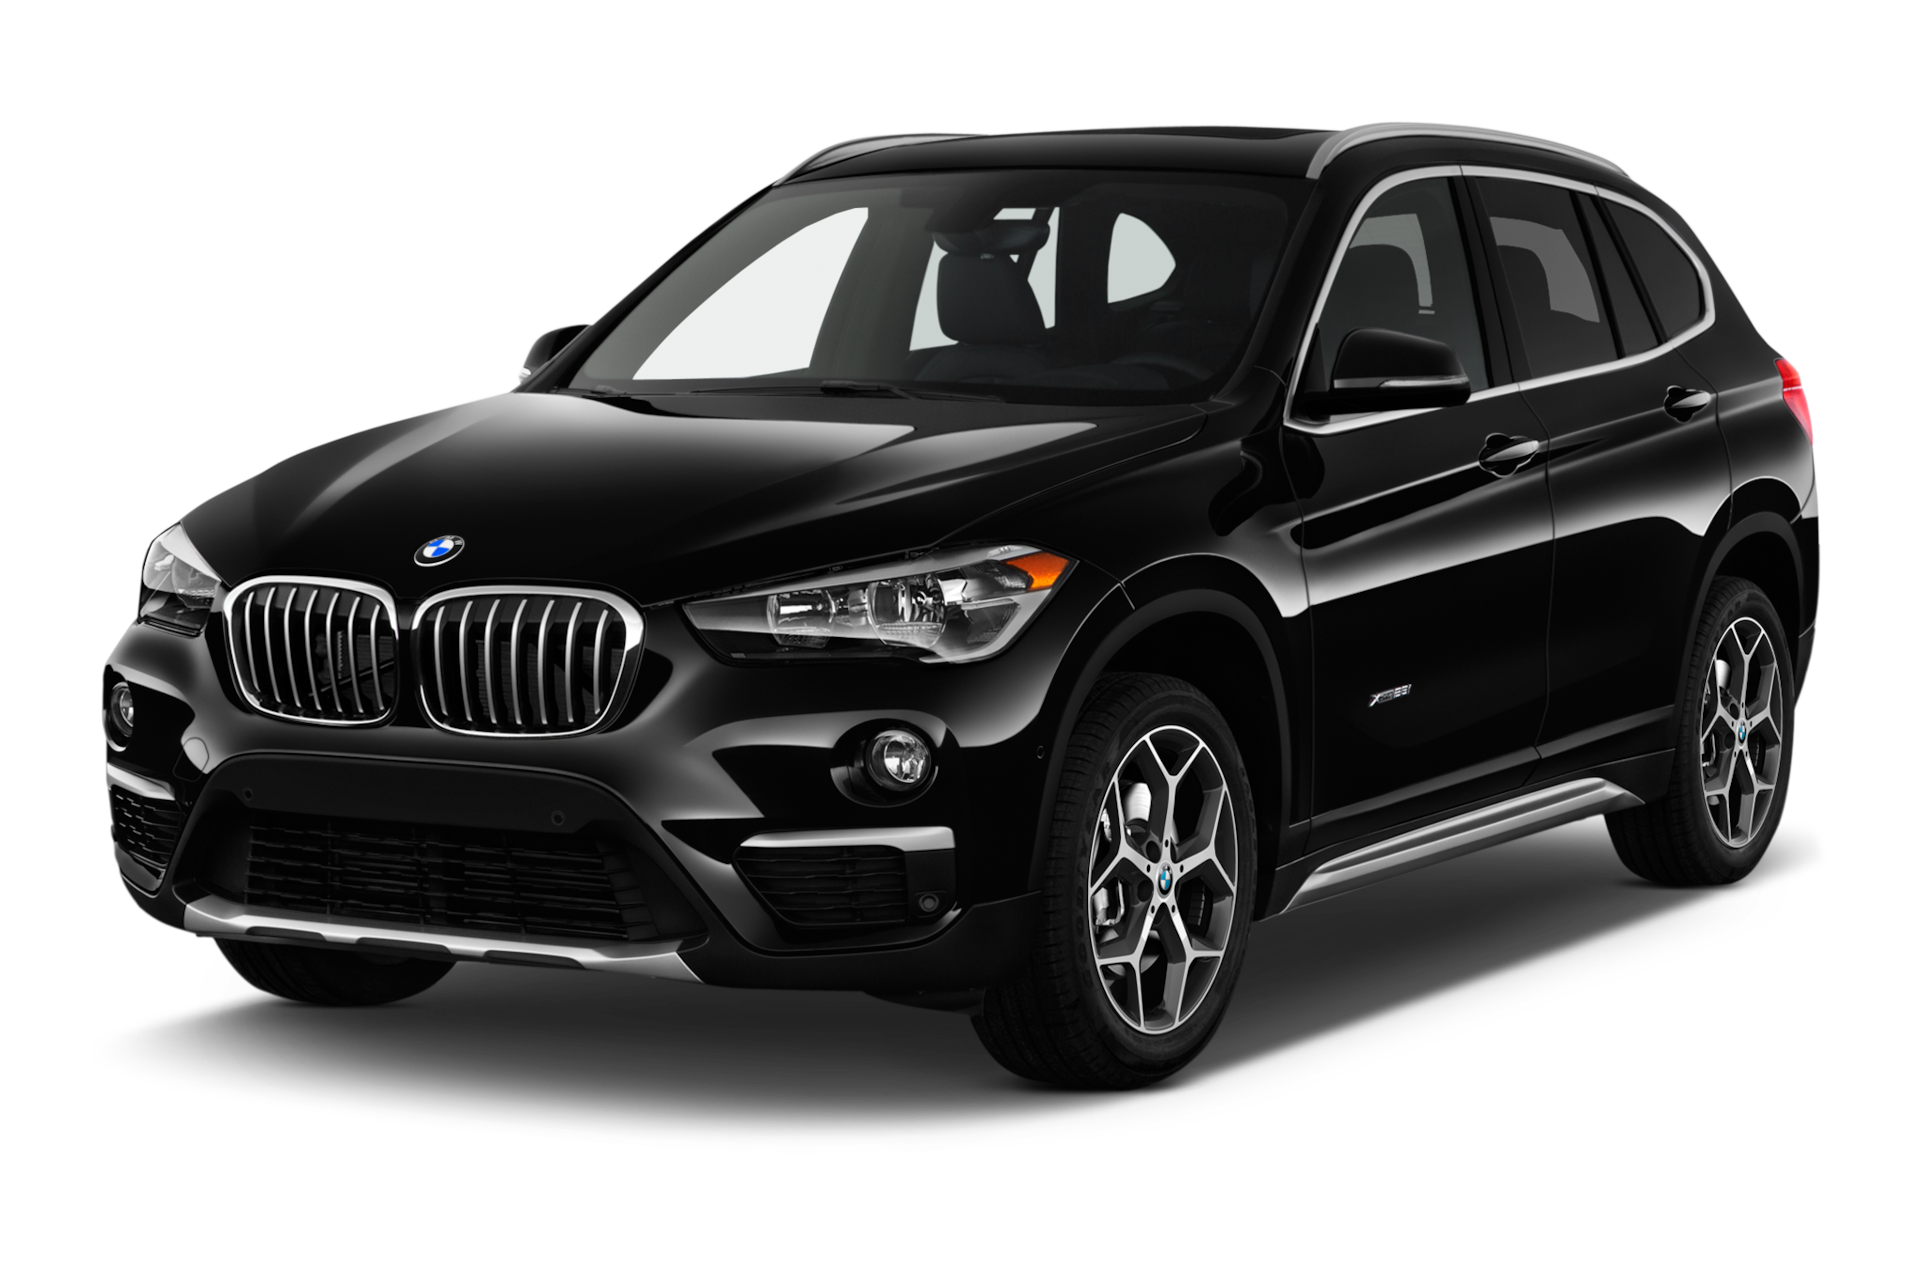 2018 BMW X1 Prices, Reviews, and Photos - MotorTrend